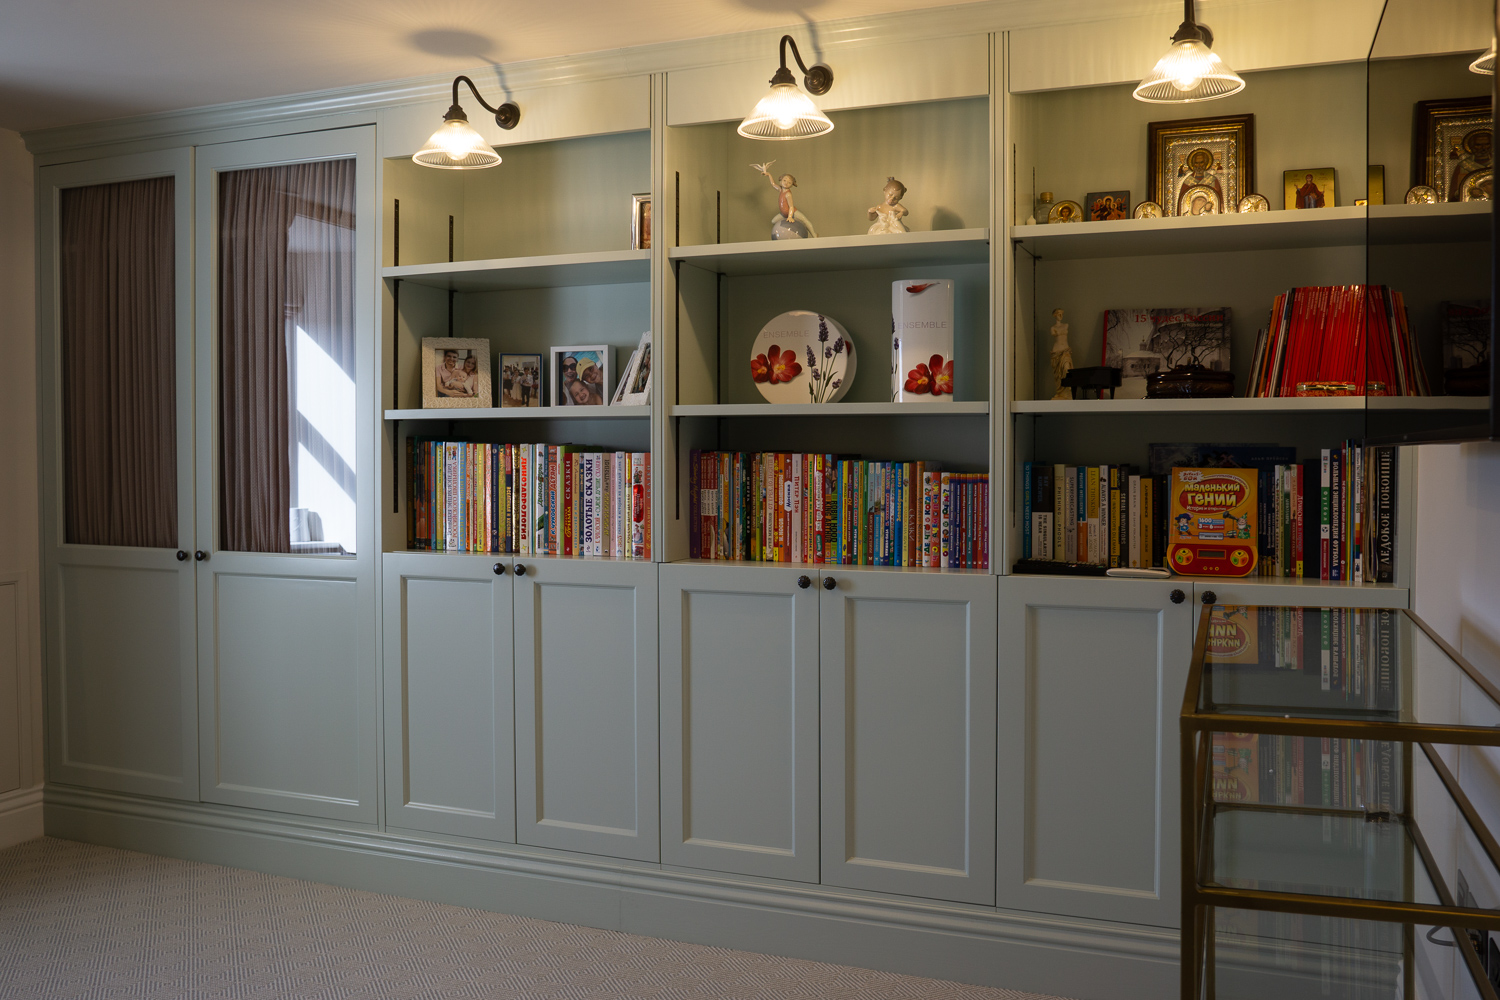 Wardrobe & shelving, Glass doored wardrobe with cabinets and shelves built around chimney breast.
